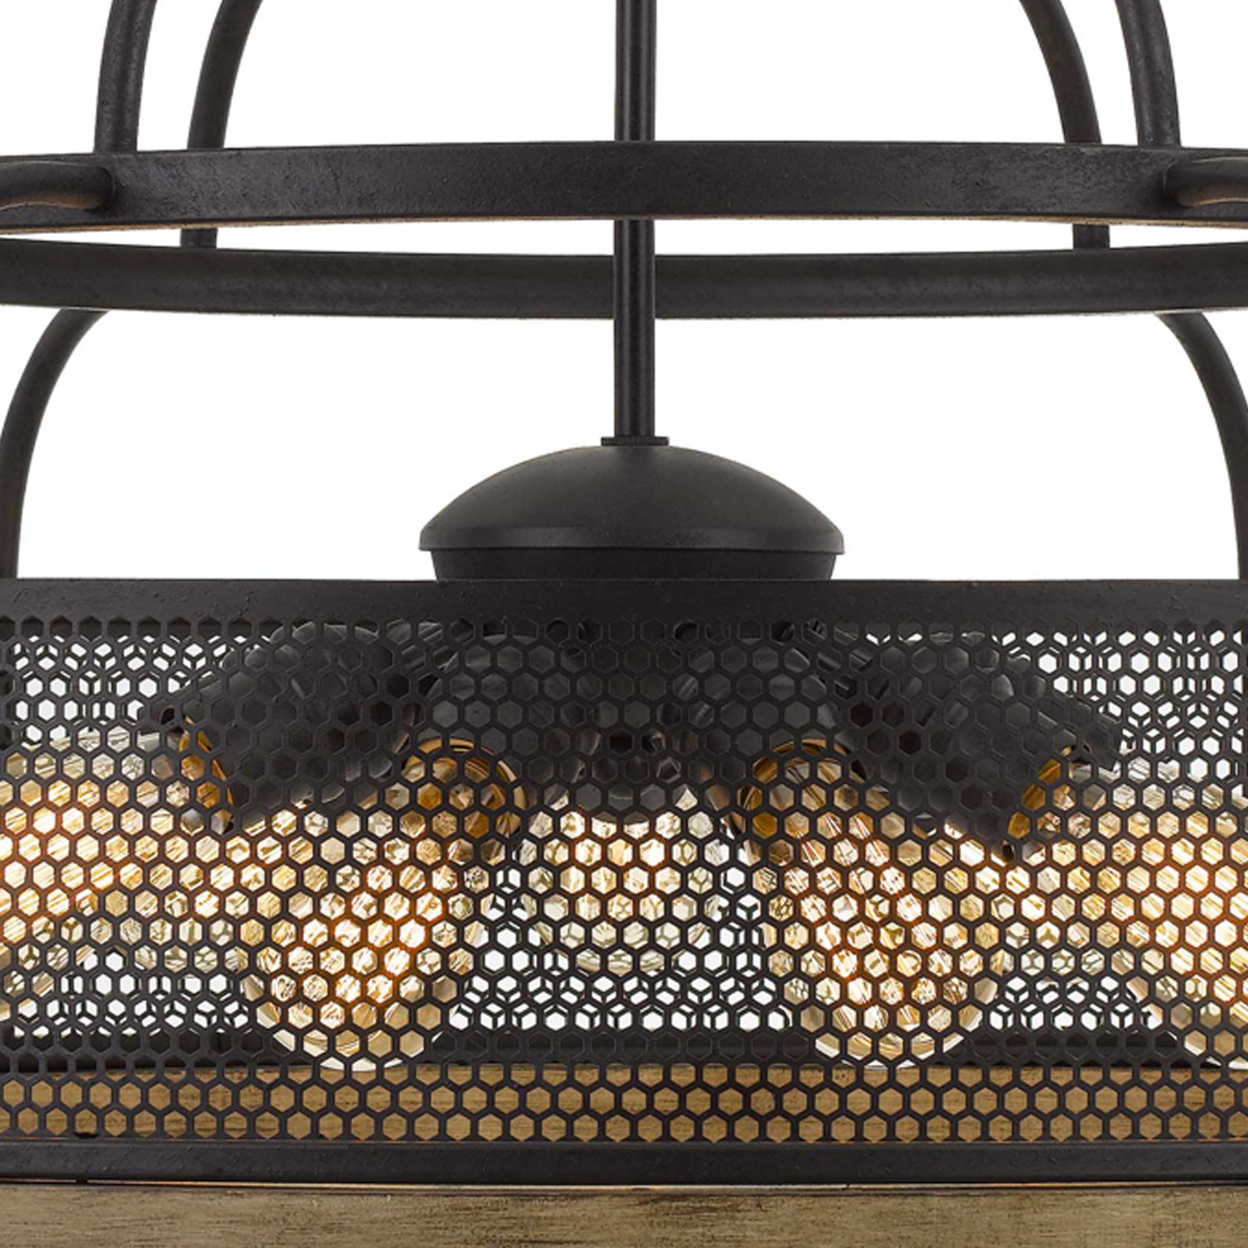 9 Bulb Chandelier With Wooden And Perforated Metal Frame, Black And Brown- Saltoro Sherpi